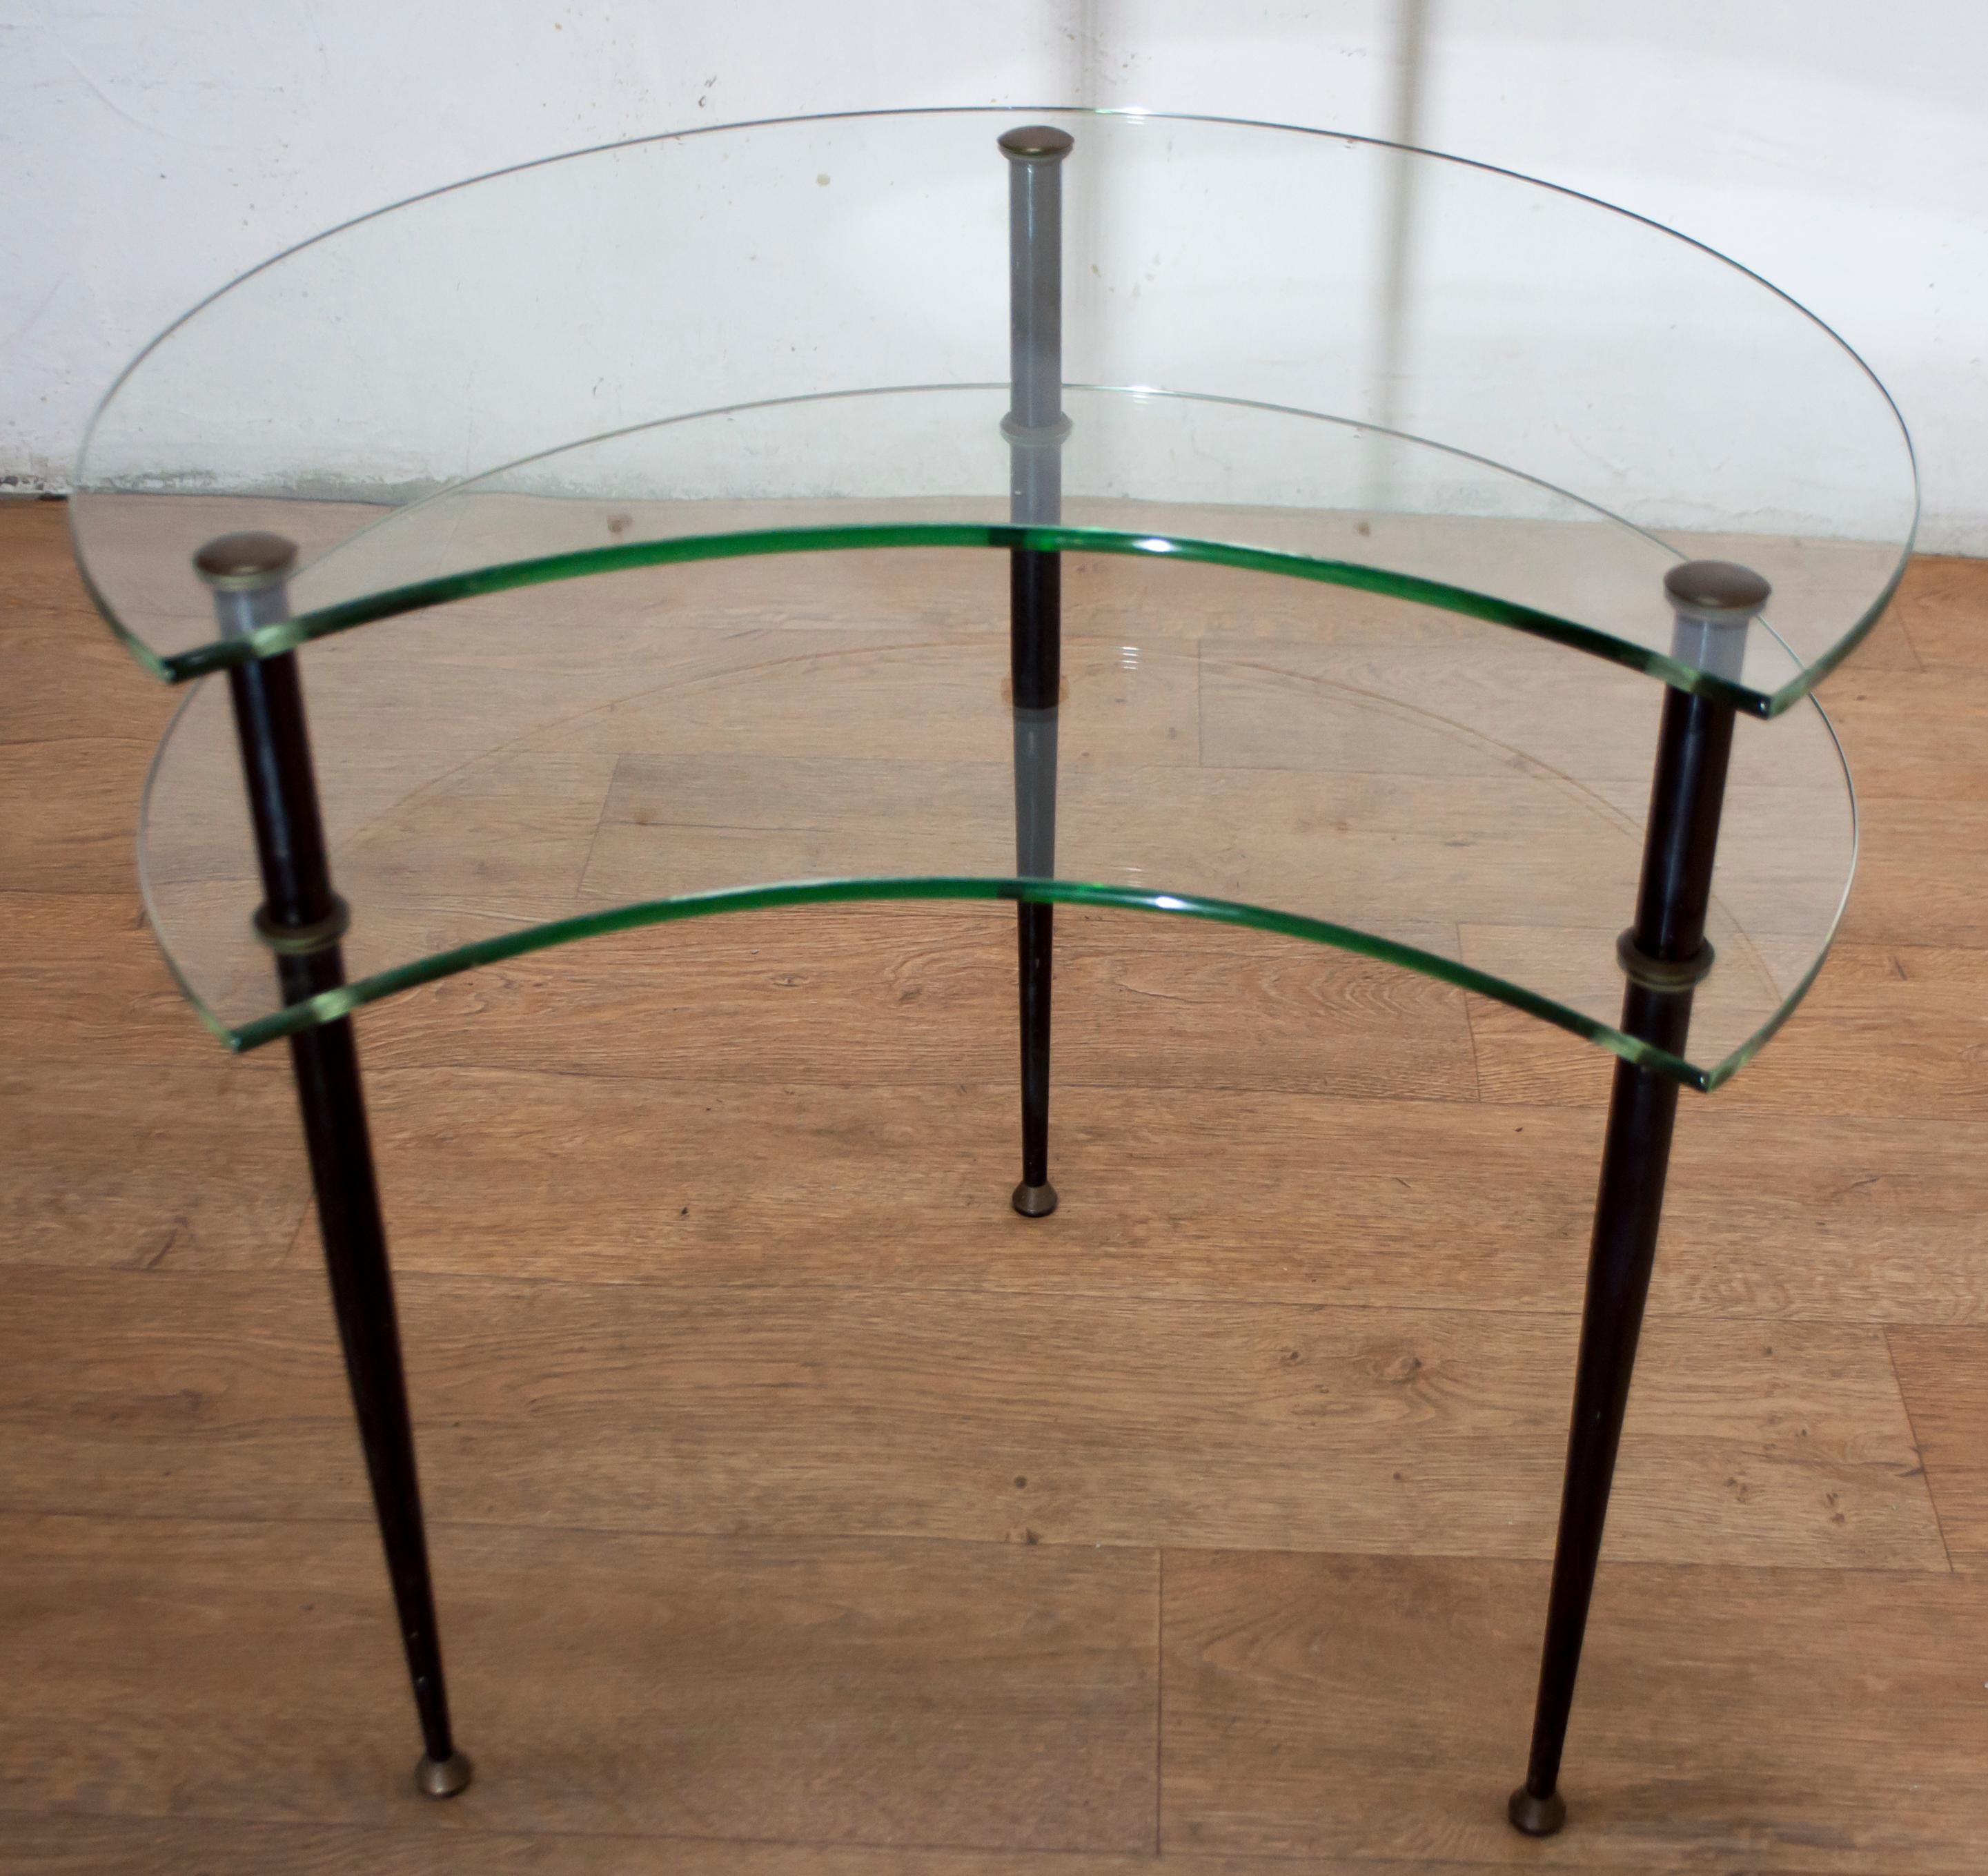 This coffee table was designed by Edoardo Paoli around 1955 and is made of lacquered brass and tempered glass and was produced by Vitrex. It has two half-moon glass tops on three black lacquered brass legs.

